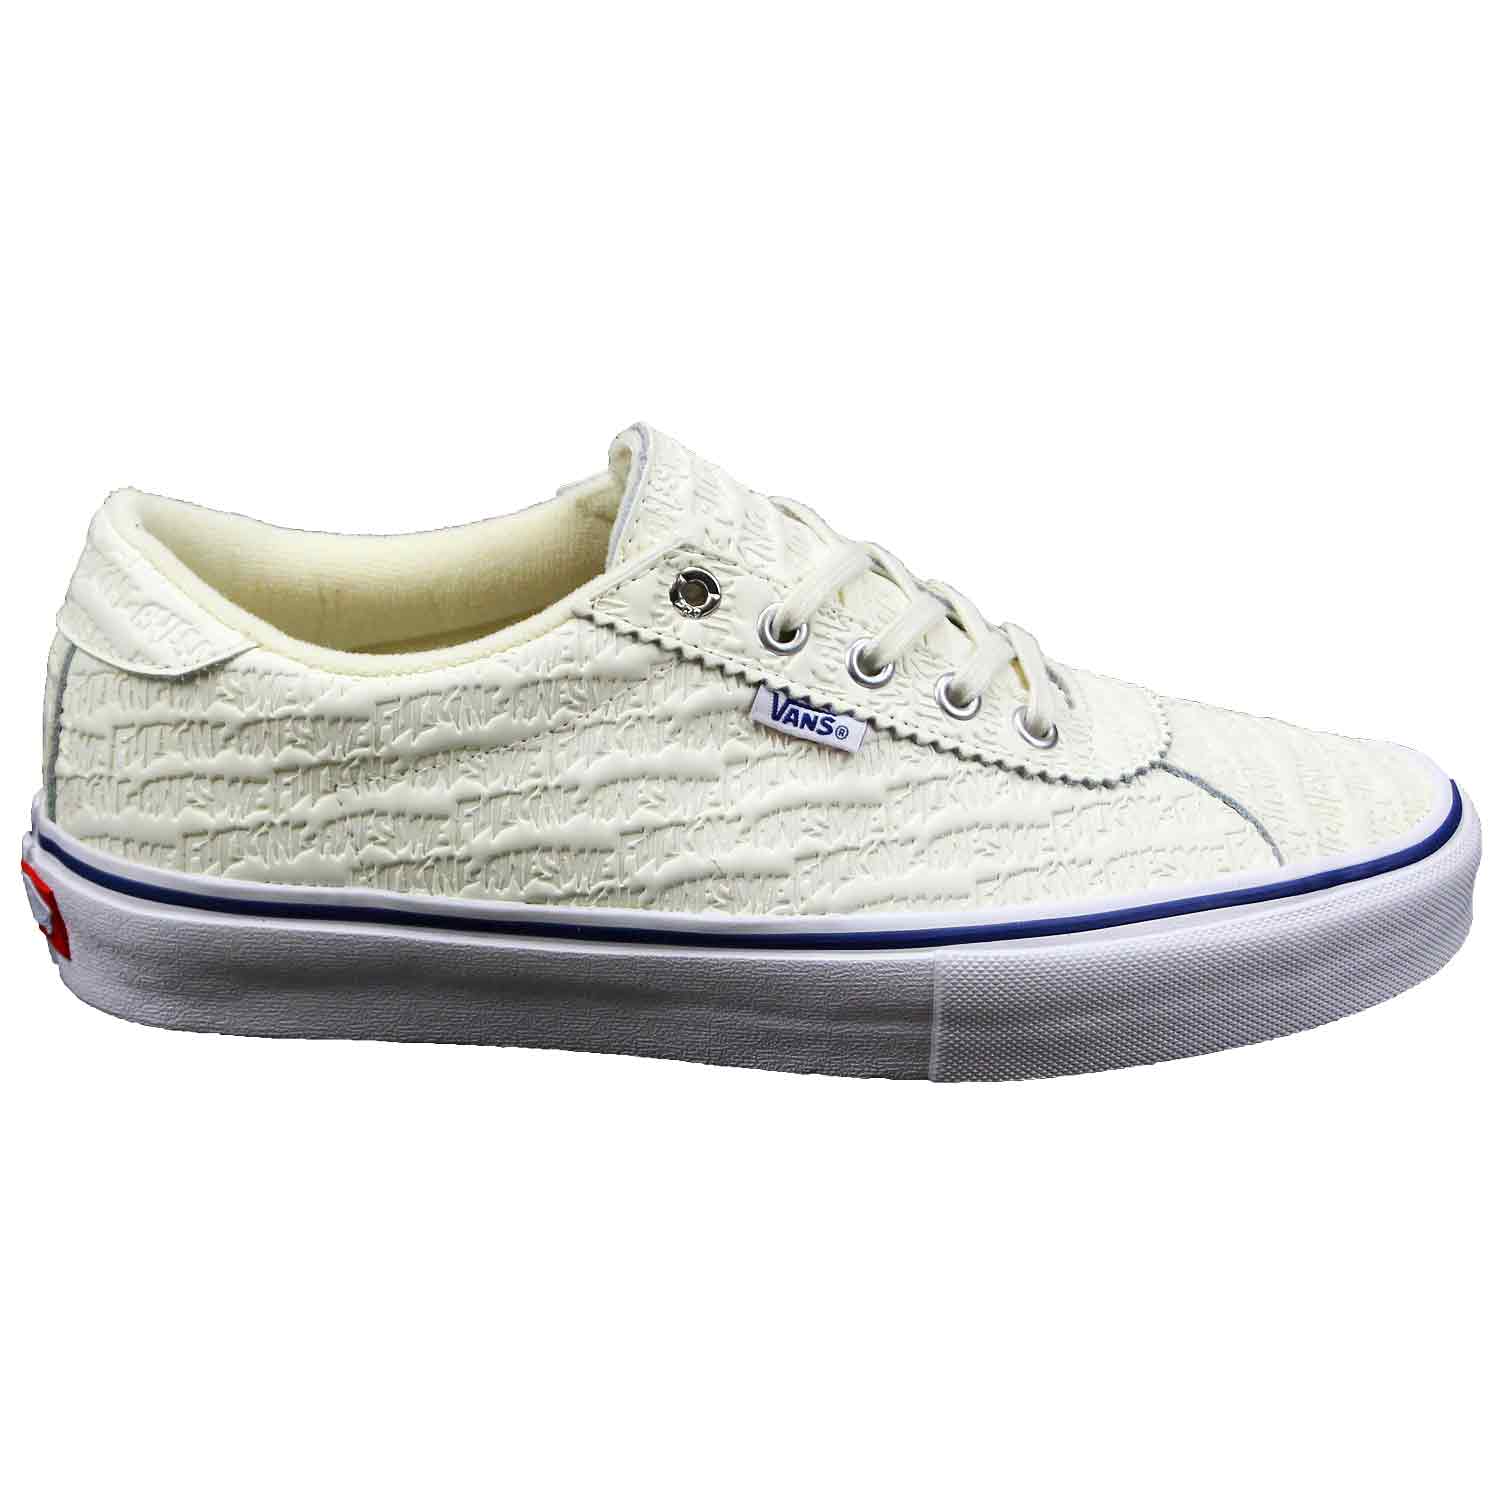 Vans Epoch 94 Pro Fucking Awesome in stock at SPoT Skate Shop